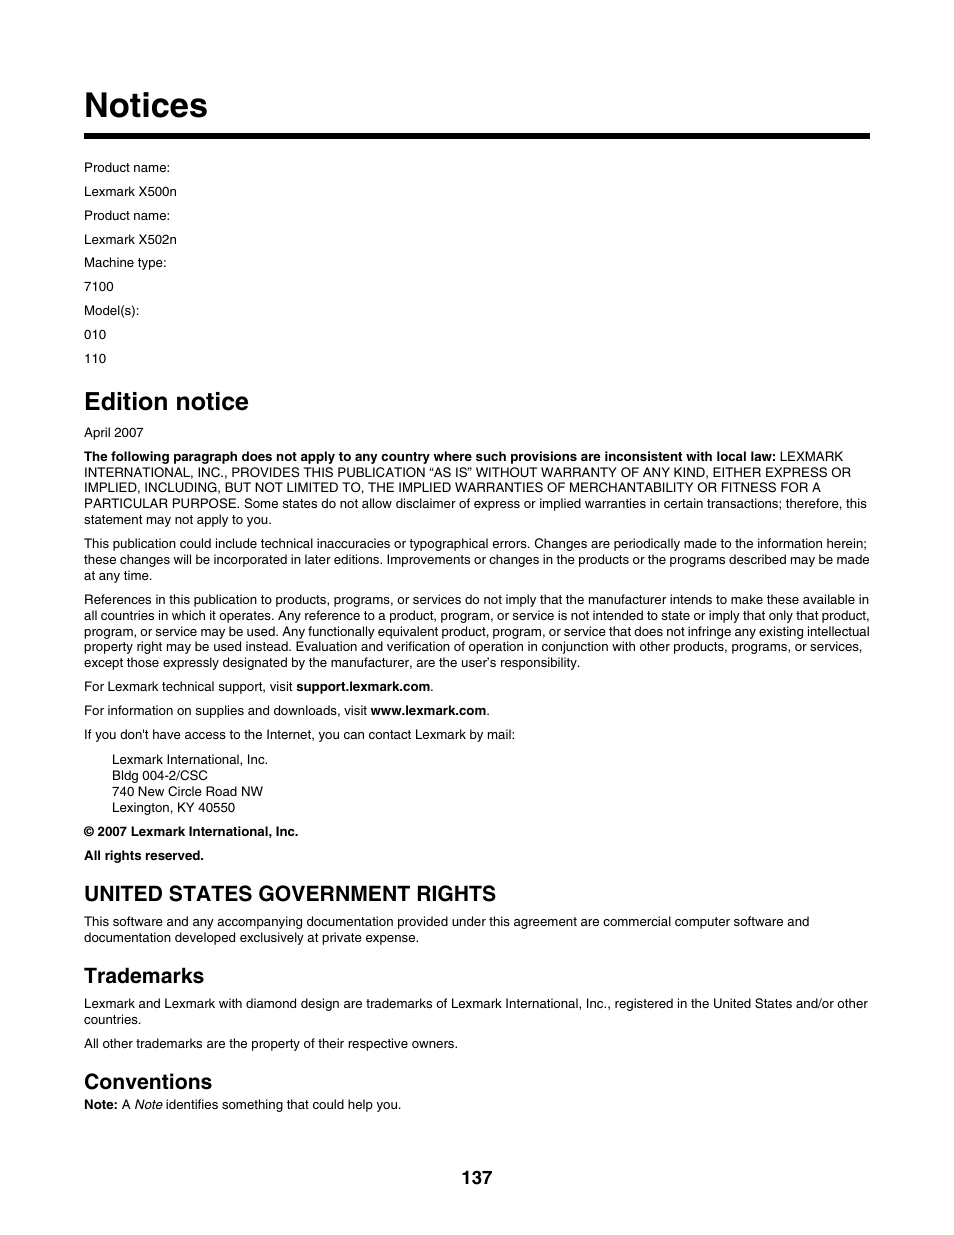 Notices, Edition notice, United states government rights | Trademarks, Conventions | Lexmark X500N User Manual | Page 137 / 150